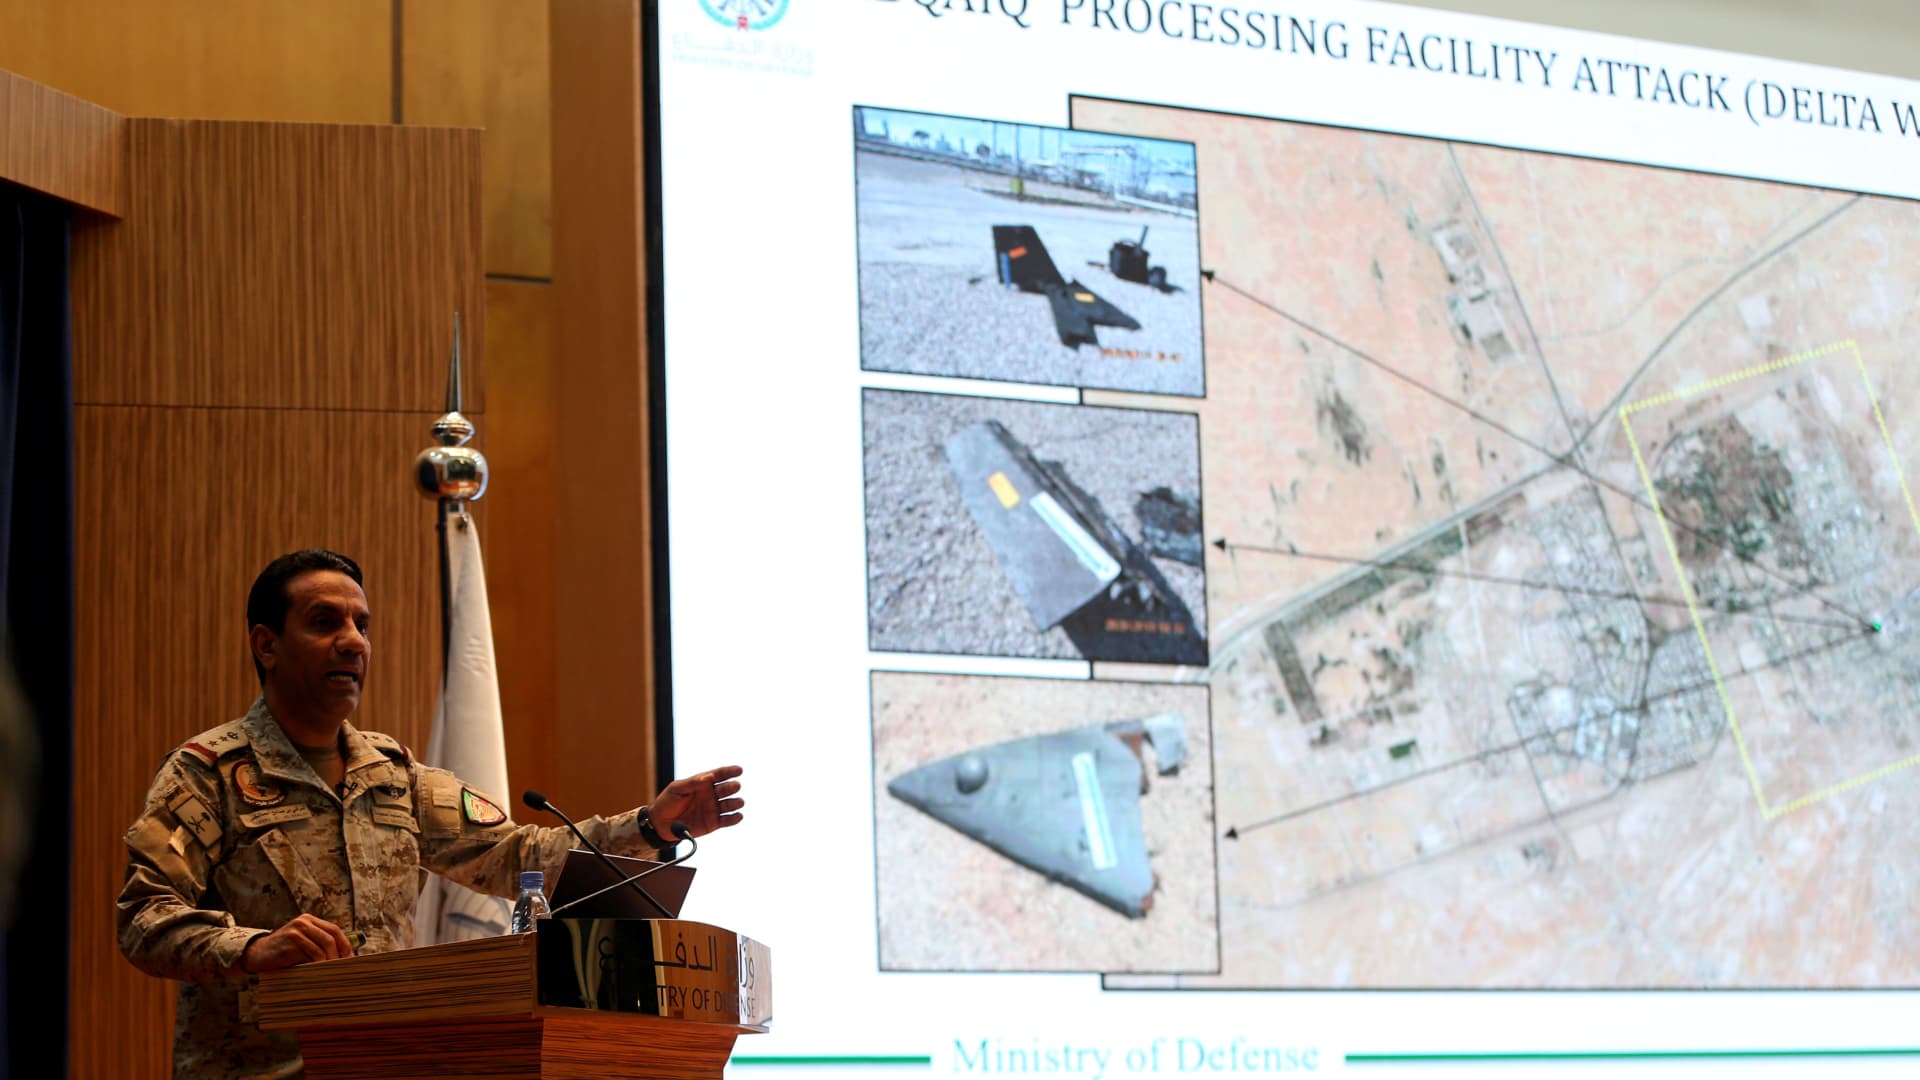 Saudi defence ministry spokesman Colonel Turki Al-Malik displays on a screen drones which the Saudi government says attacked an Aramco oil facility, during a news conference in Riyadh, Saudi Arabia September 18, 2019.